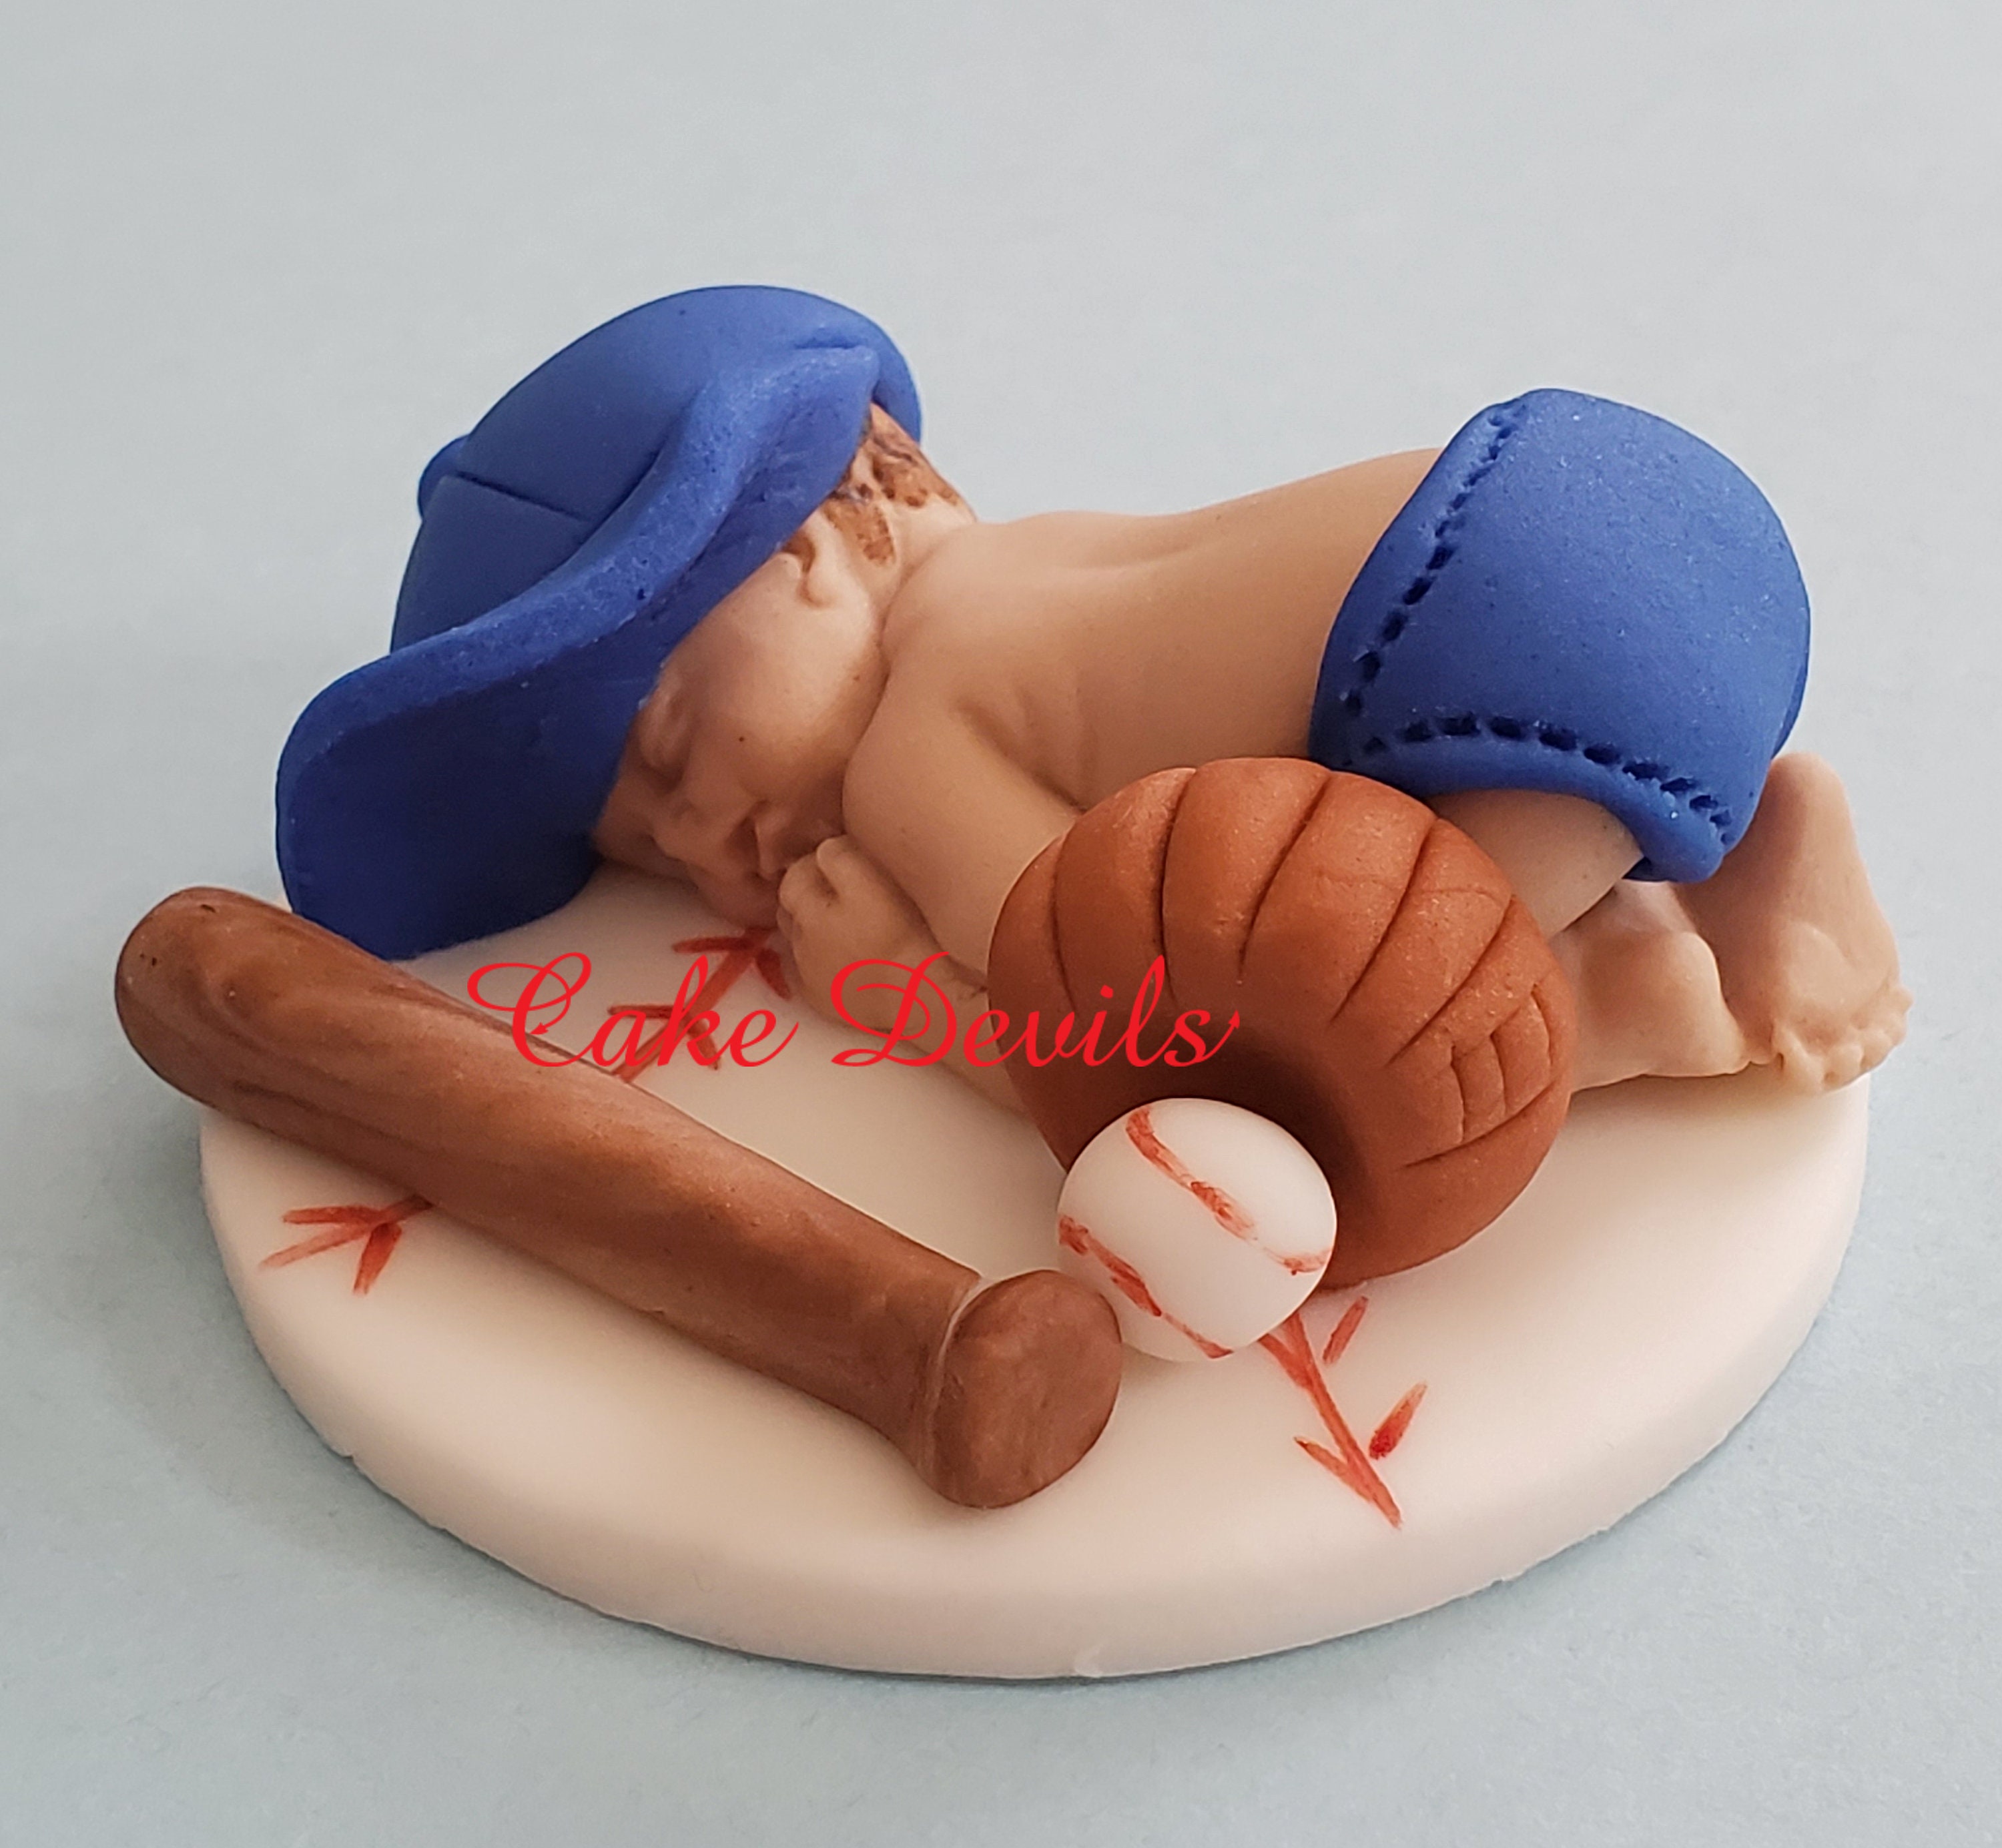 Picnic Baby Shower Cake Topper all Handmade with a Fondant Sleeping Baby in a Basket 